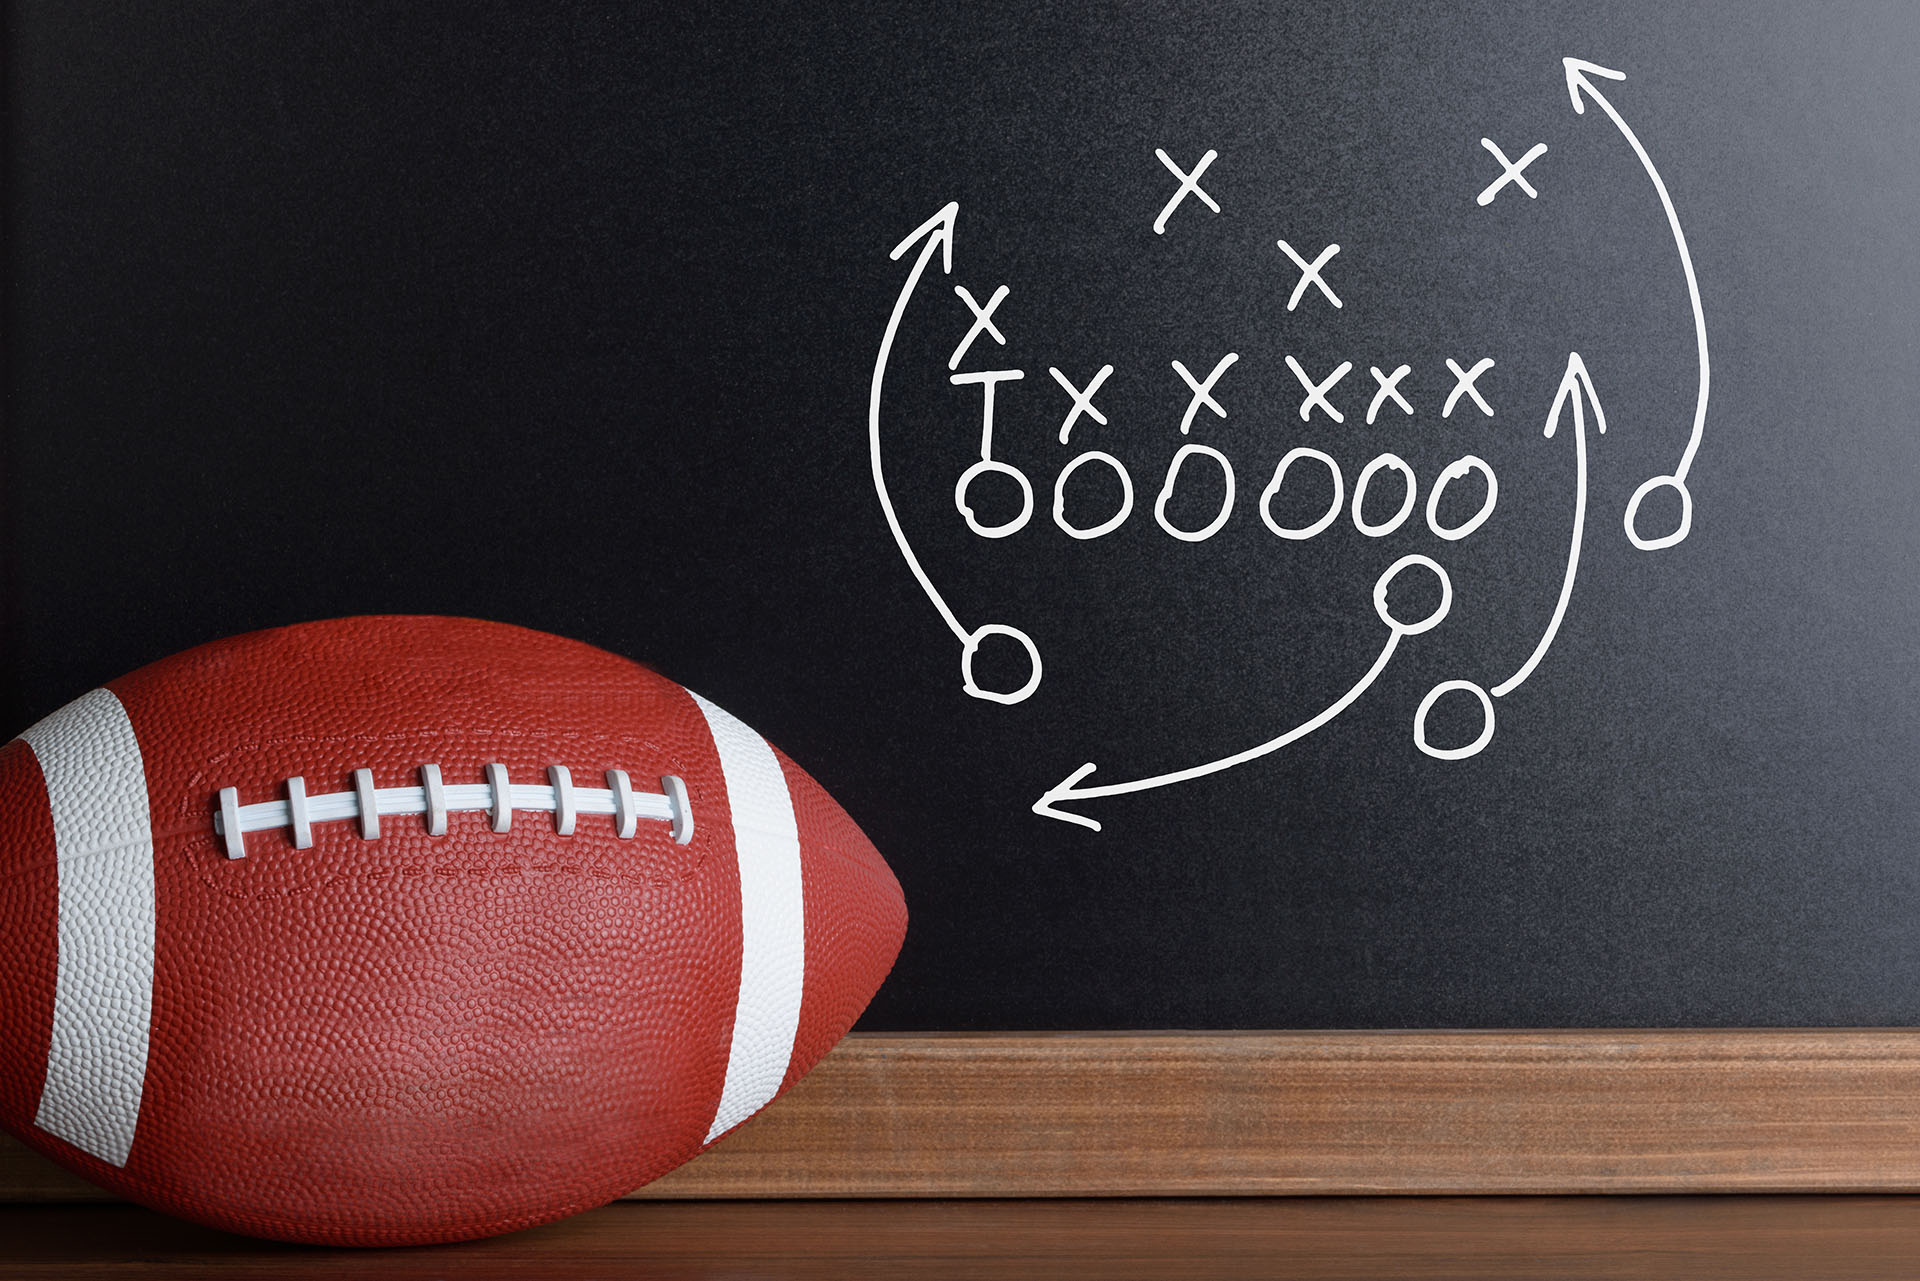 Football and chalkboard depicting hotel strategy